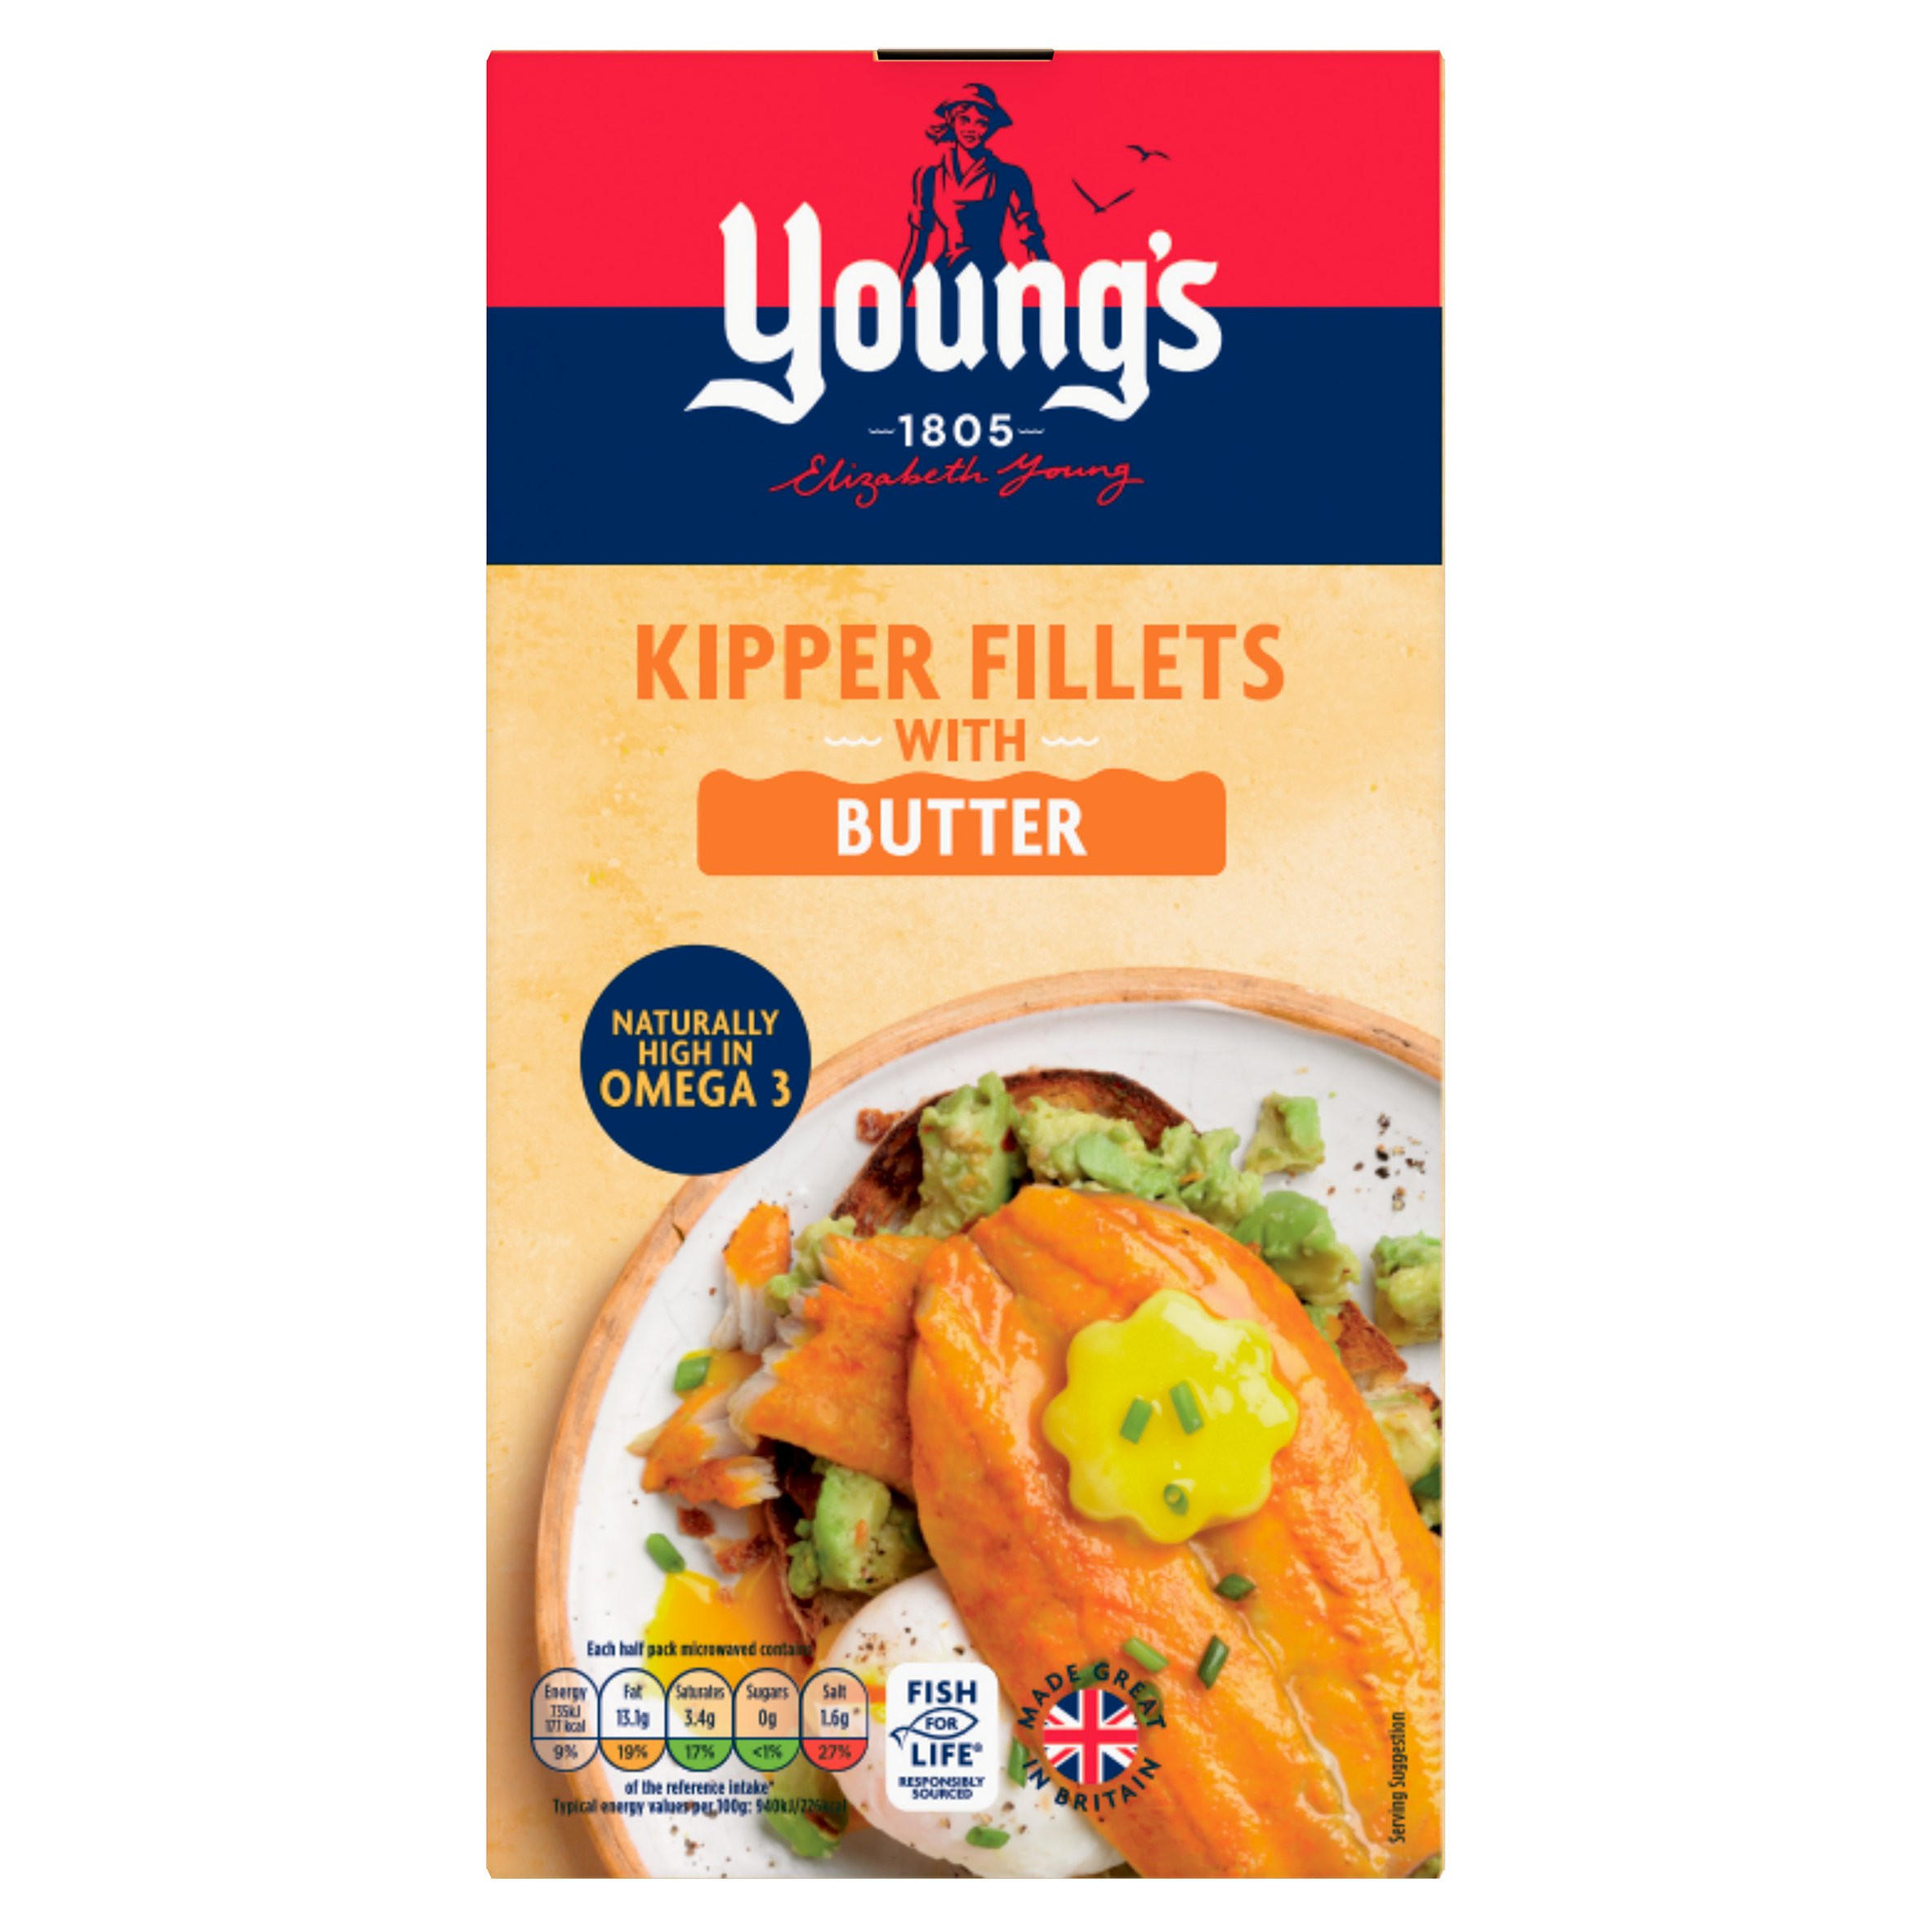 youngs_kipper_fillets_with_butter_170g_55328_T1.jpg?